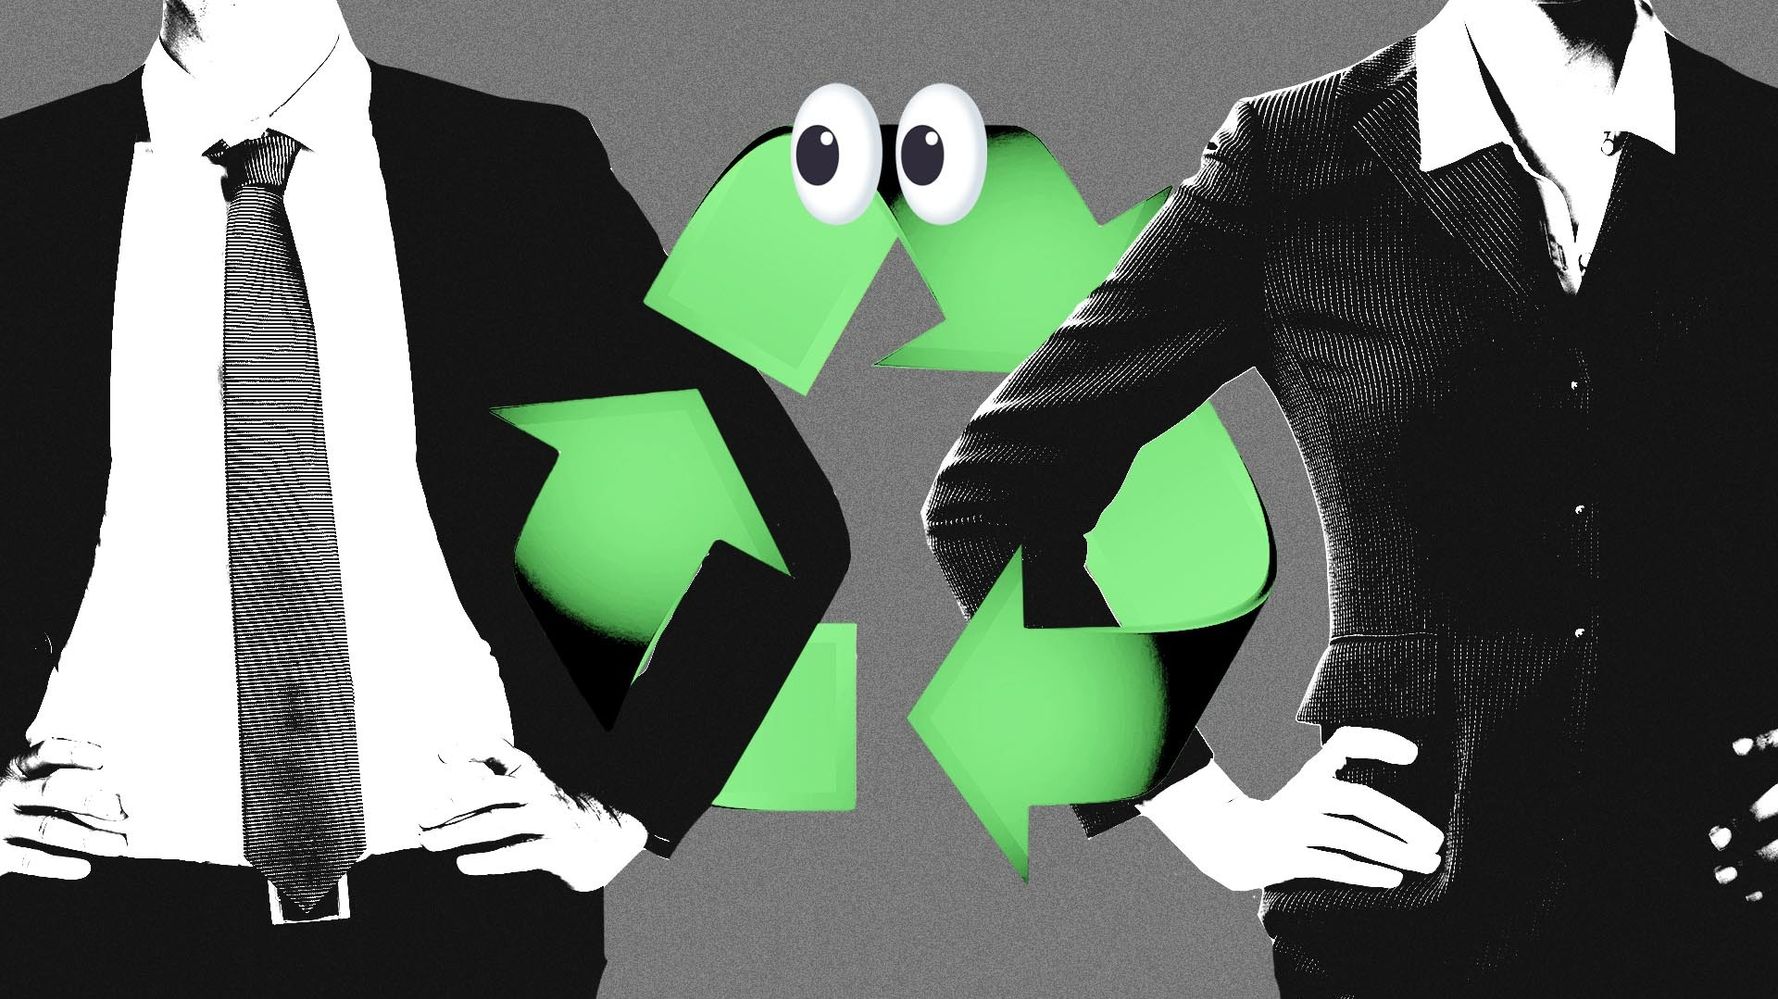 Can We Trust Corporations To Deal With Their Own Waste?